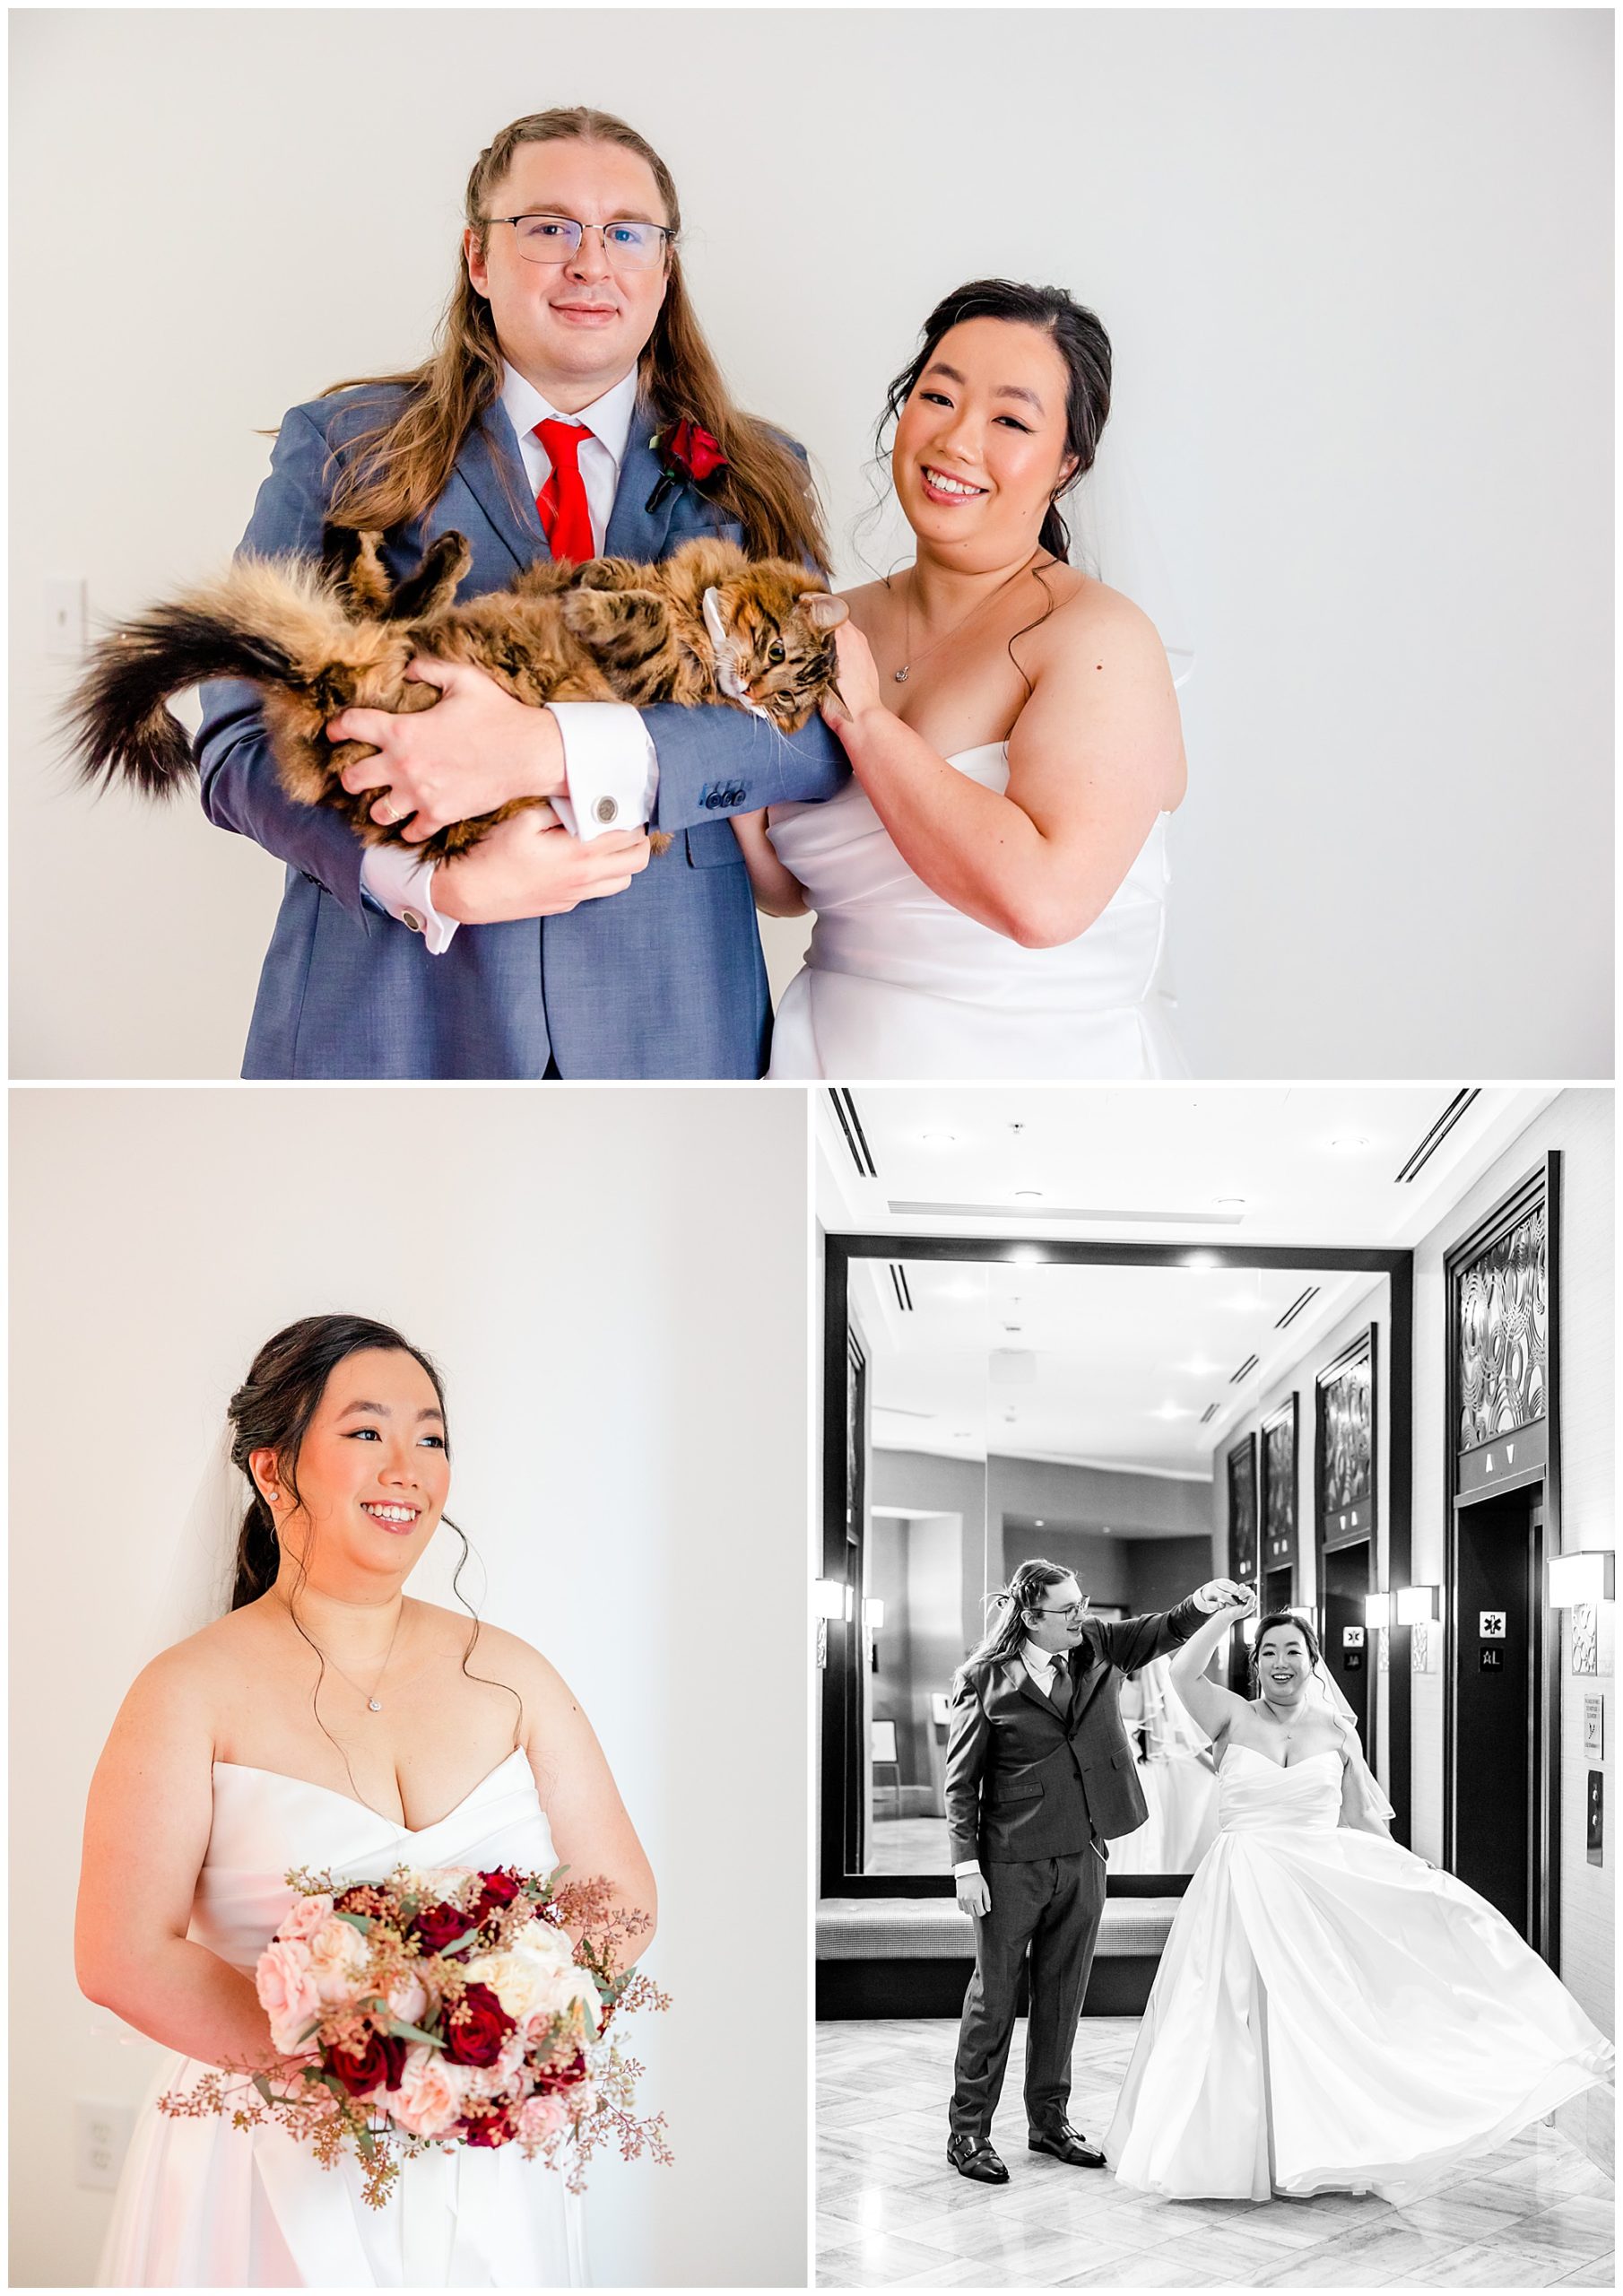 best of 2022 elopements and micro-weddings, best of weddings, best of 2022, DC wedding photographer, DC micro-wedding photographer, DC elopement photographer, Alexandria elopement photographer, Old Town elopement photographer, Rachel E.H. Photography, couple with cat, Chinese-American bride